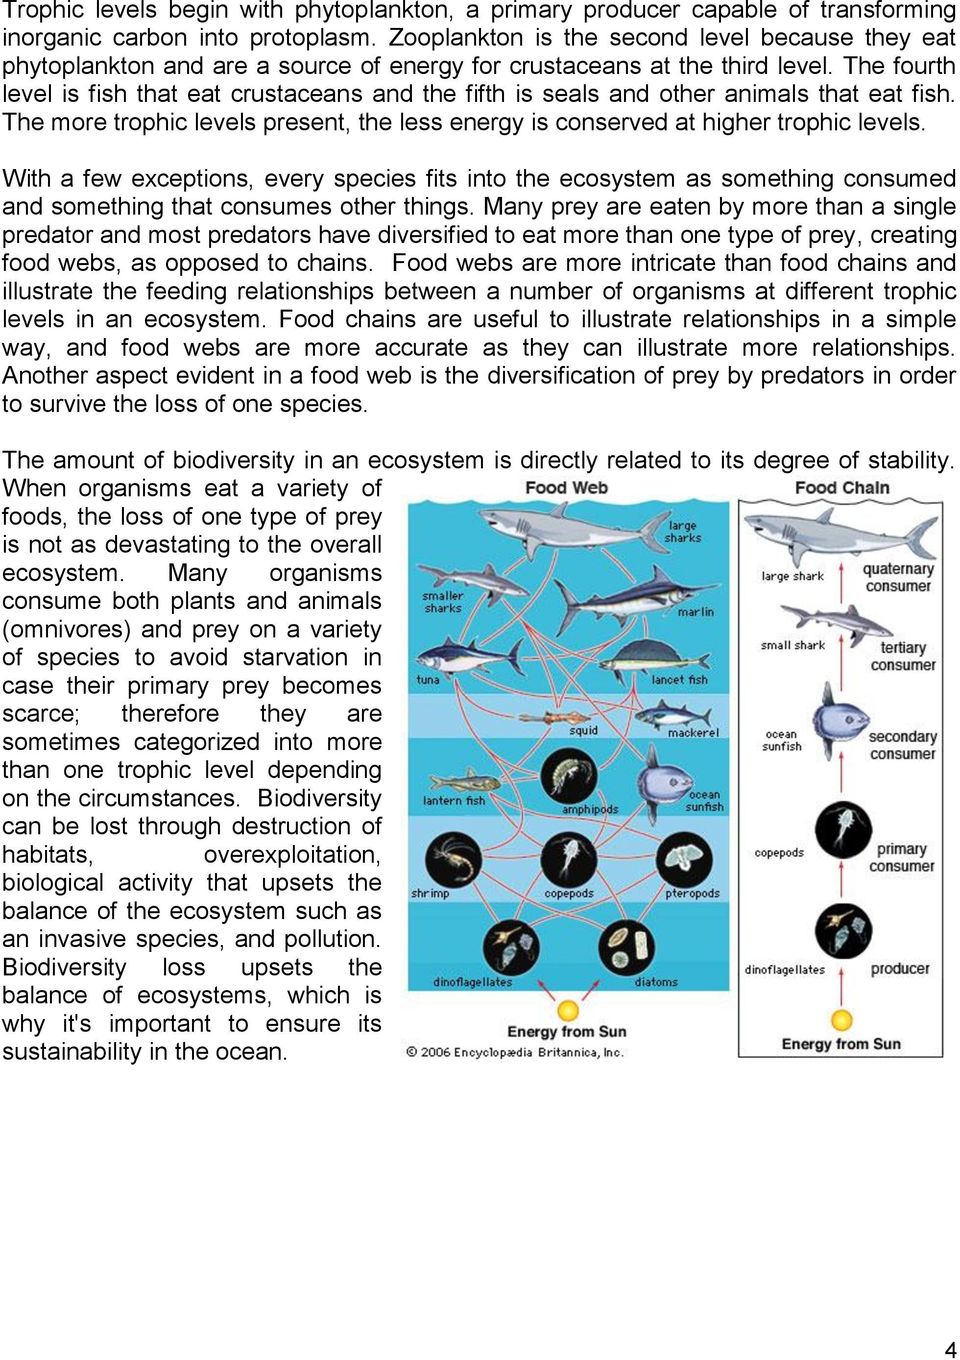 The fourth level is fish that eat crustaceans and the fifth is seals and other animals that eat fish. The more trophic levels present, the less energy is conserved at higher trophic levels.